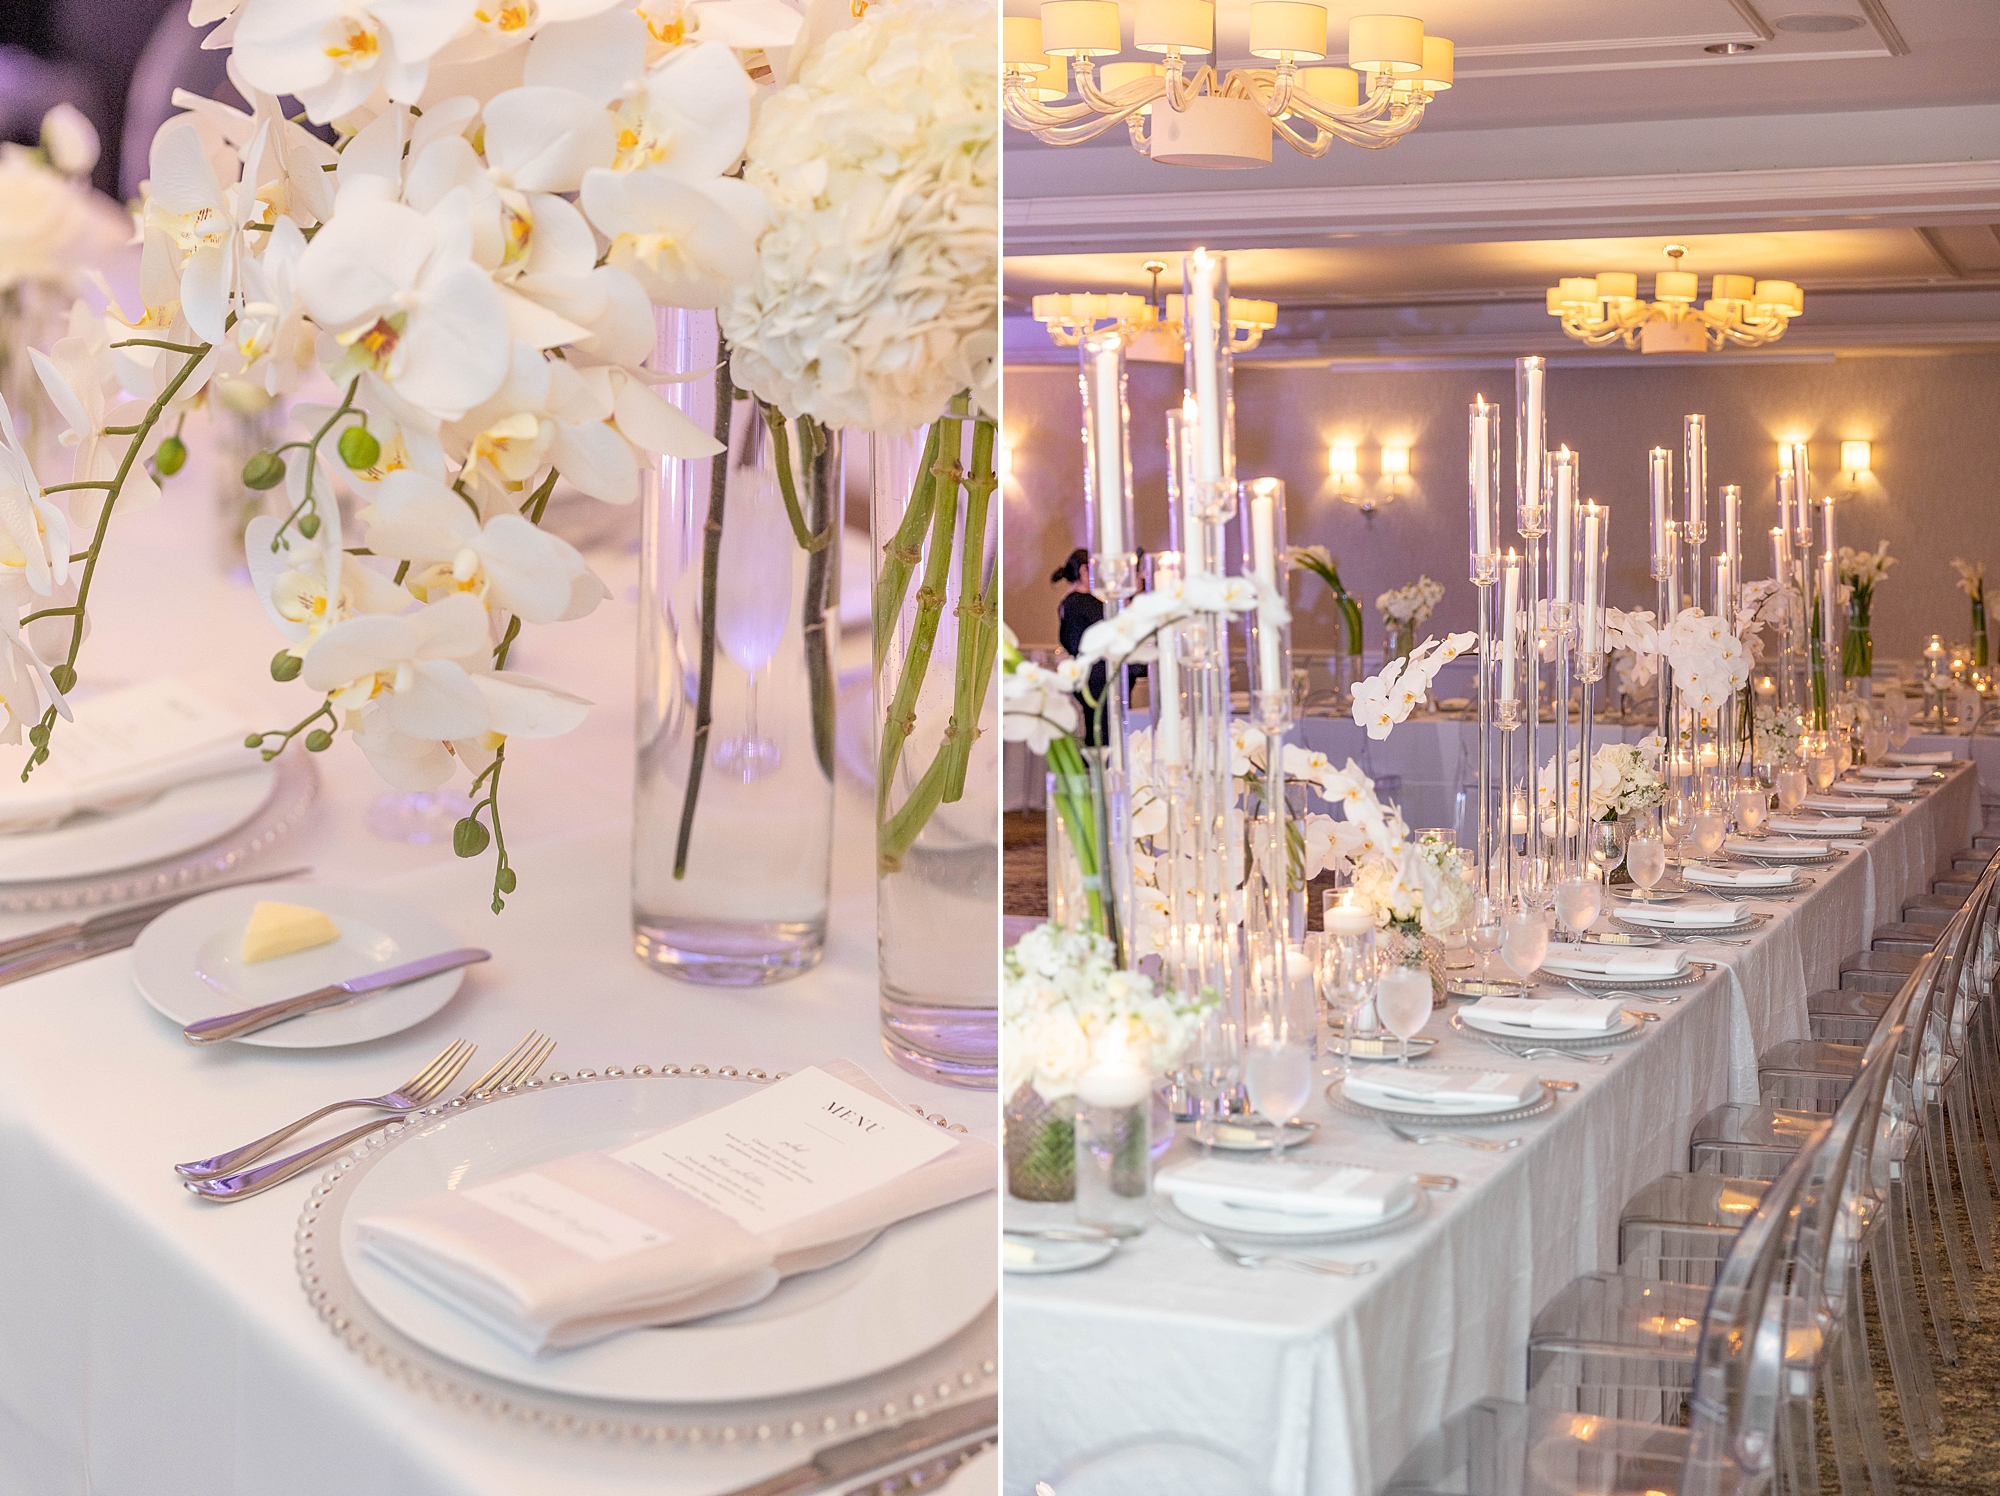 elegant wedding reception with white orchids, tapered white candles, and silver accents